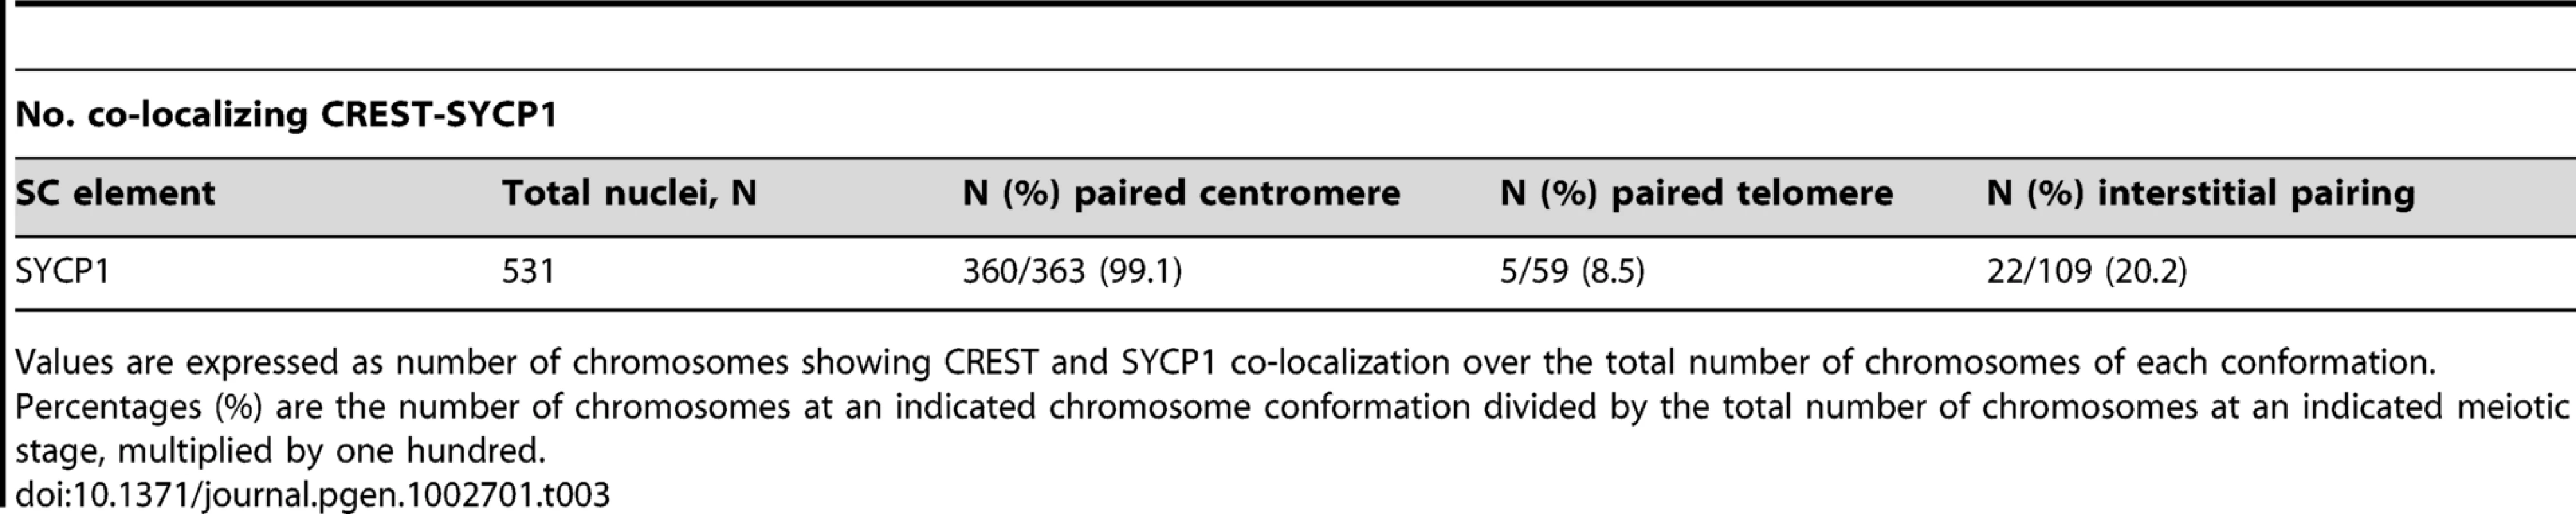 SYCP1 association with paired and unpaired centromeres in diplotene.